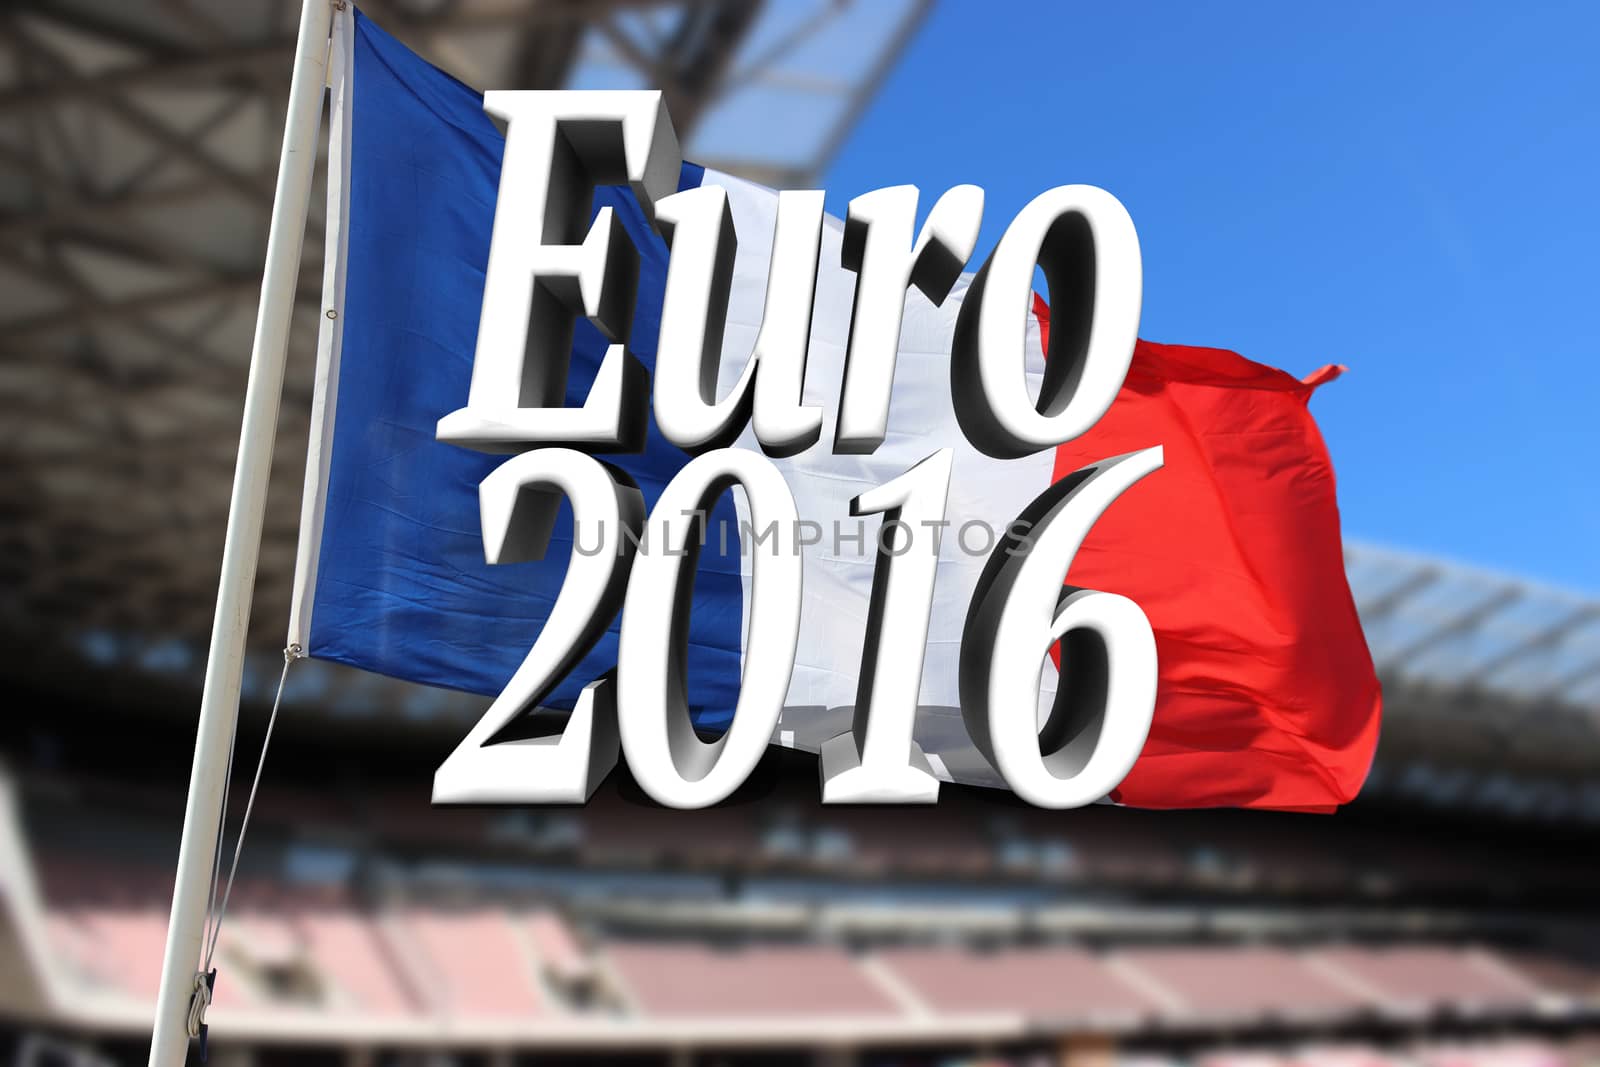 Euro 2016 France Football Championship. French Flag and Soccer Stadium in the Background
